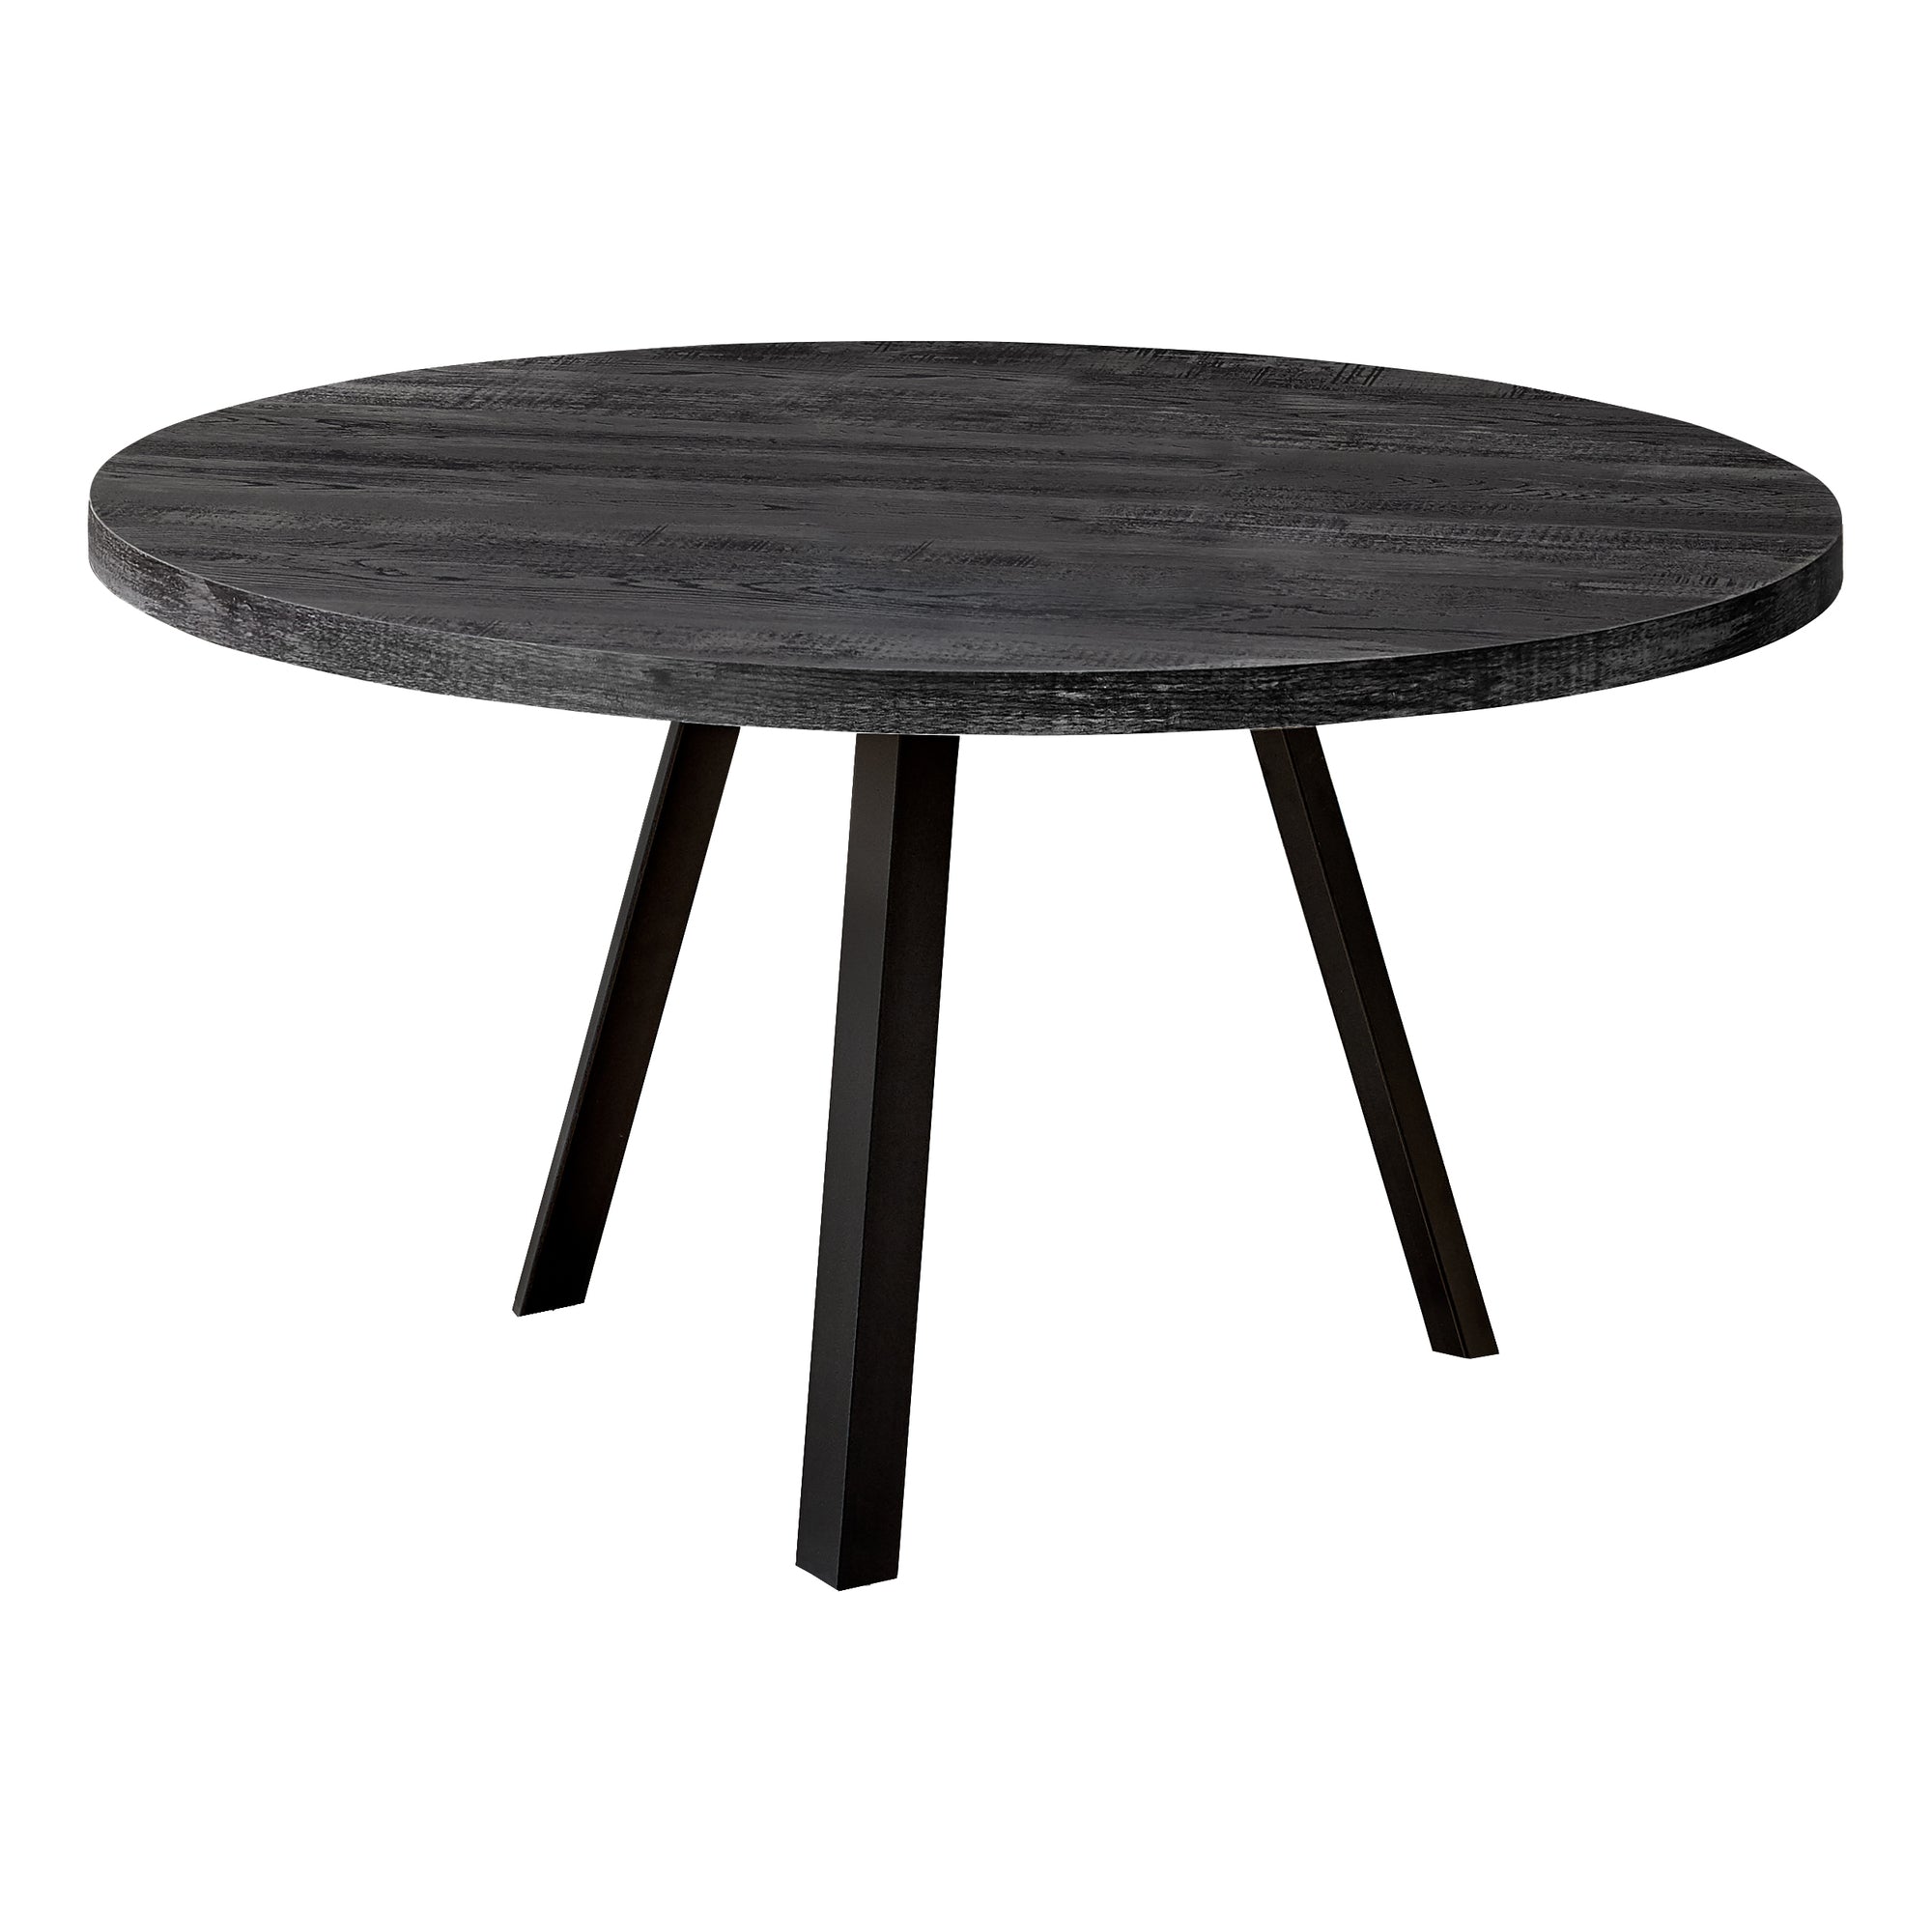 MN-457817    Coffee Table, Accent, Cocktail, Round, Living Room, 36"Dia, Metal Legs, Laminate, Black Reclaimed Wood Look, Black, Contemporary, Industrial, Modern